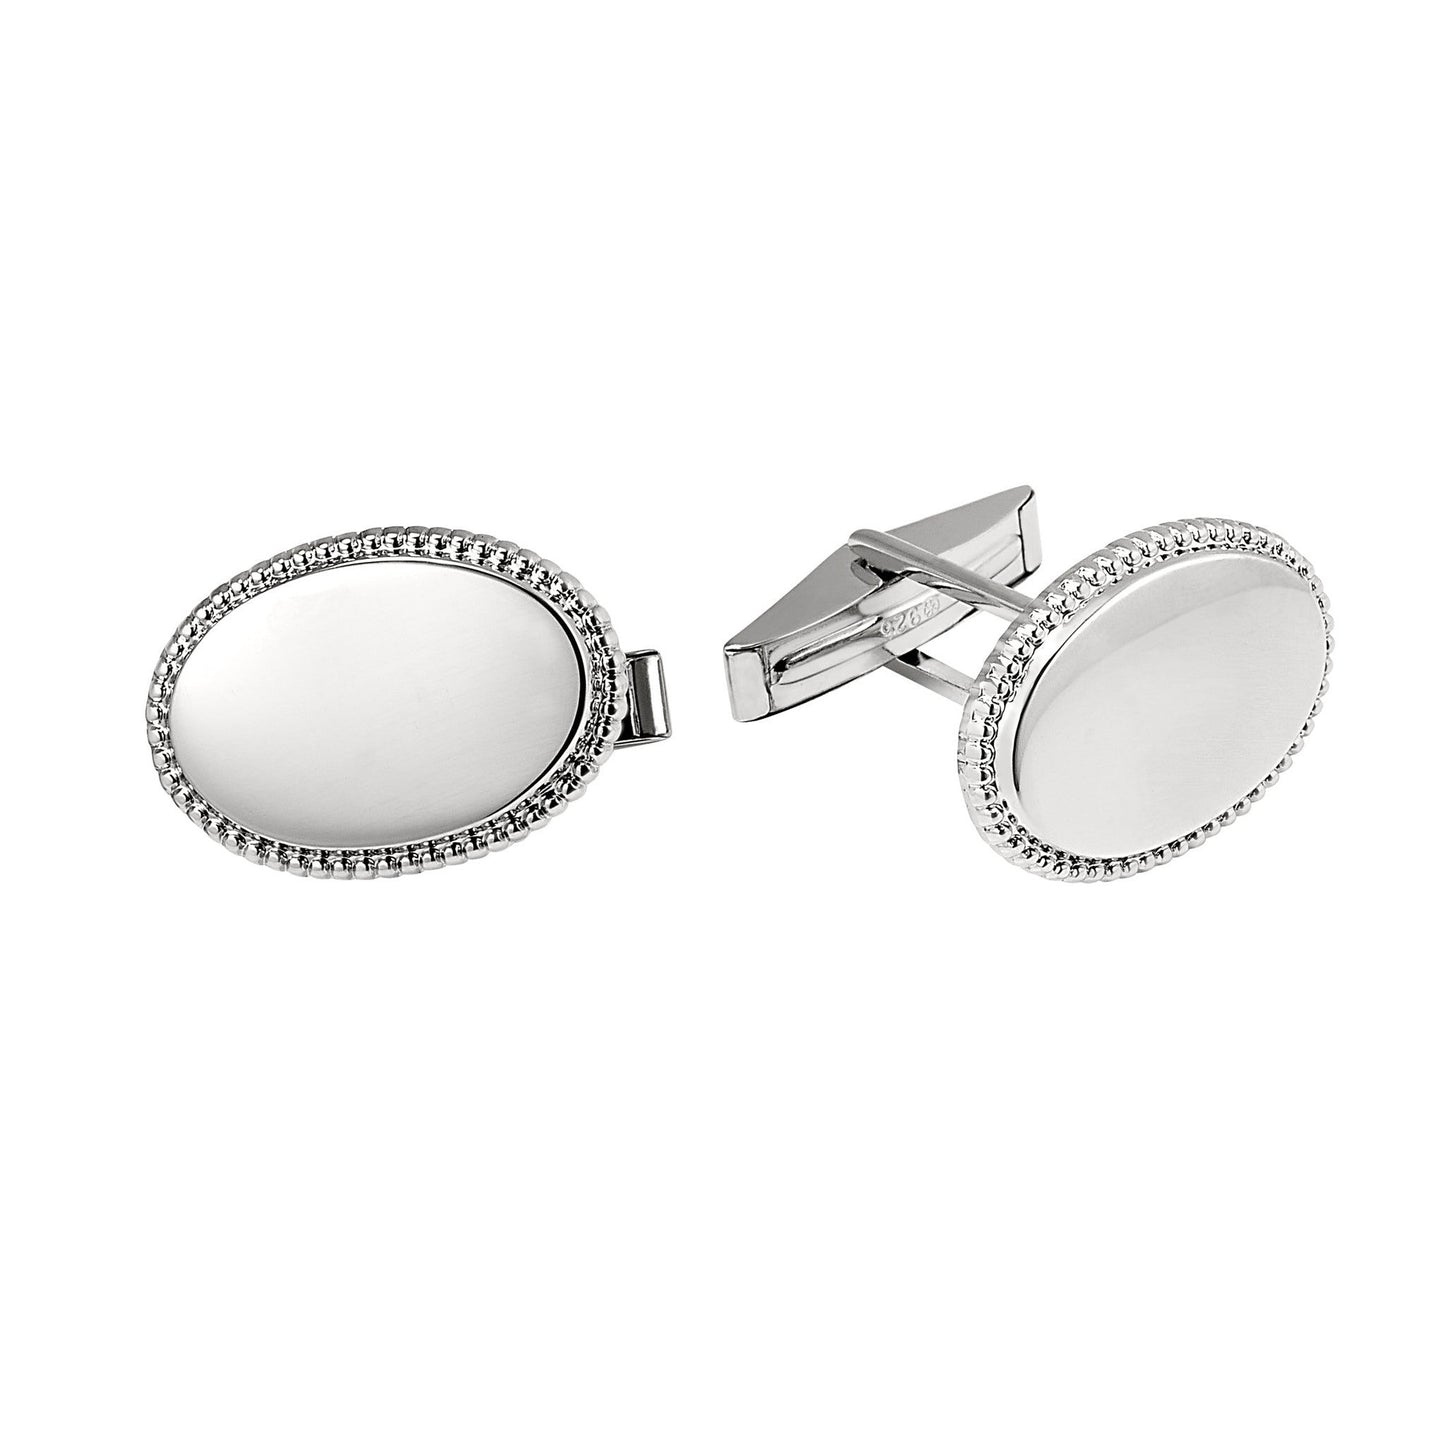 A sterling silver oval cuff links with beaded border displayed on a neutral white background.